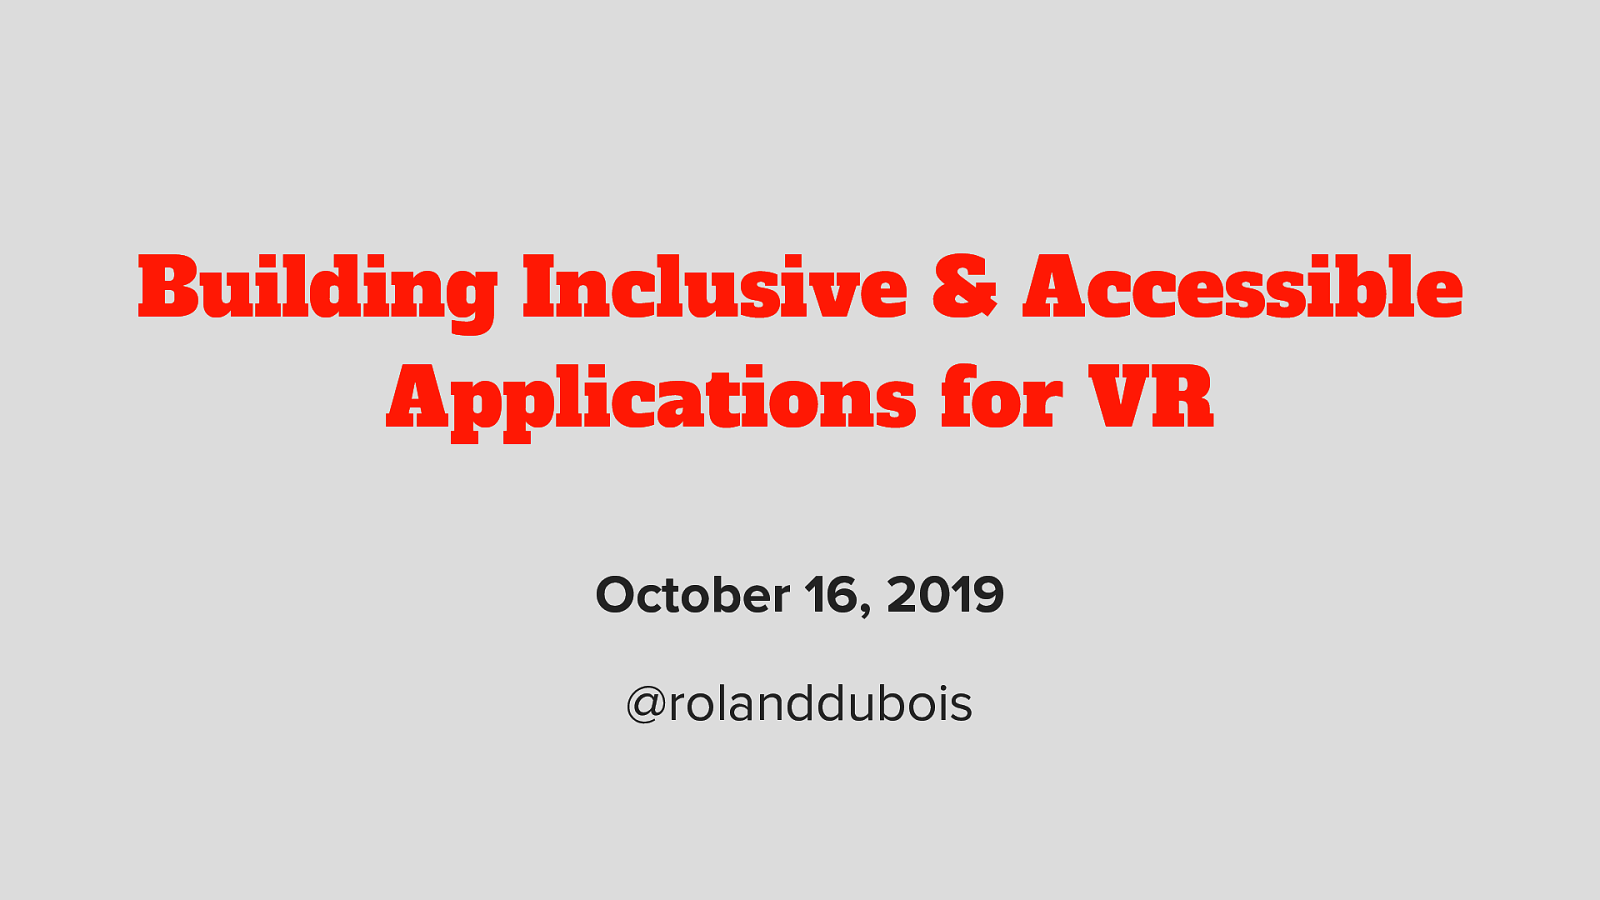 Building Inclusive & Accessible Applications for VR @ VRED